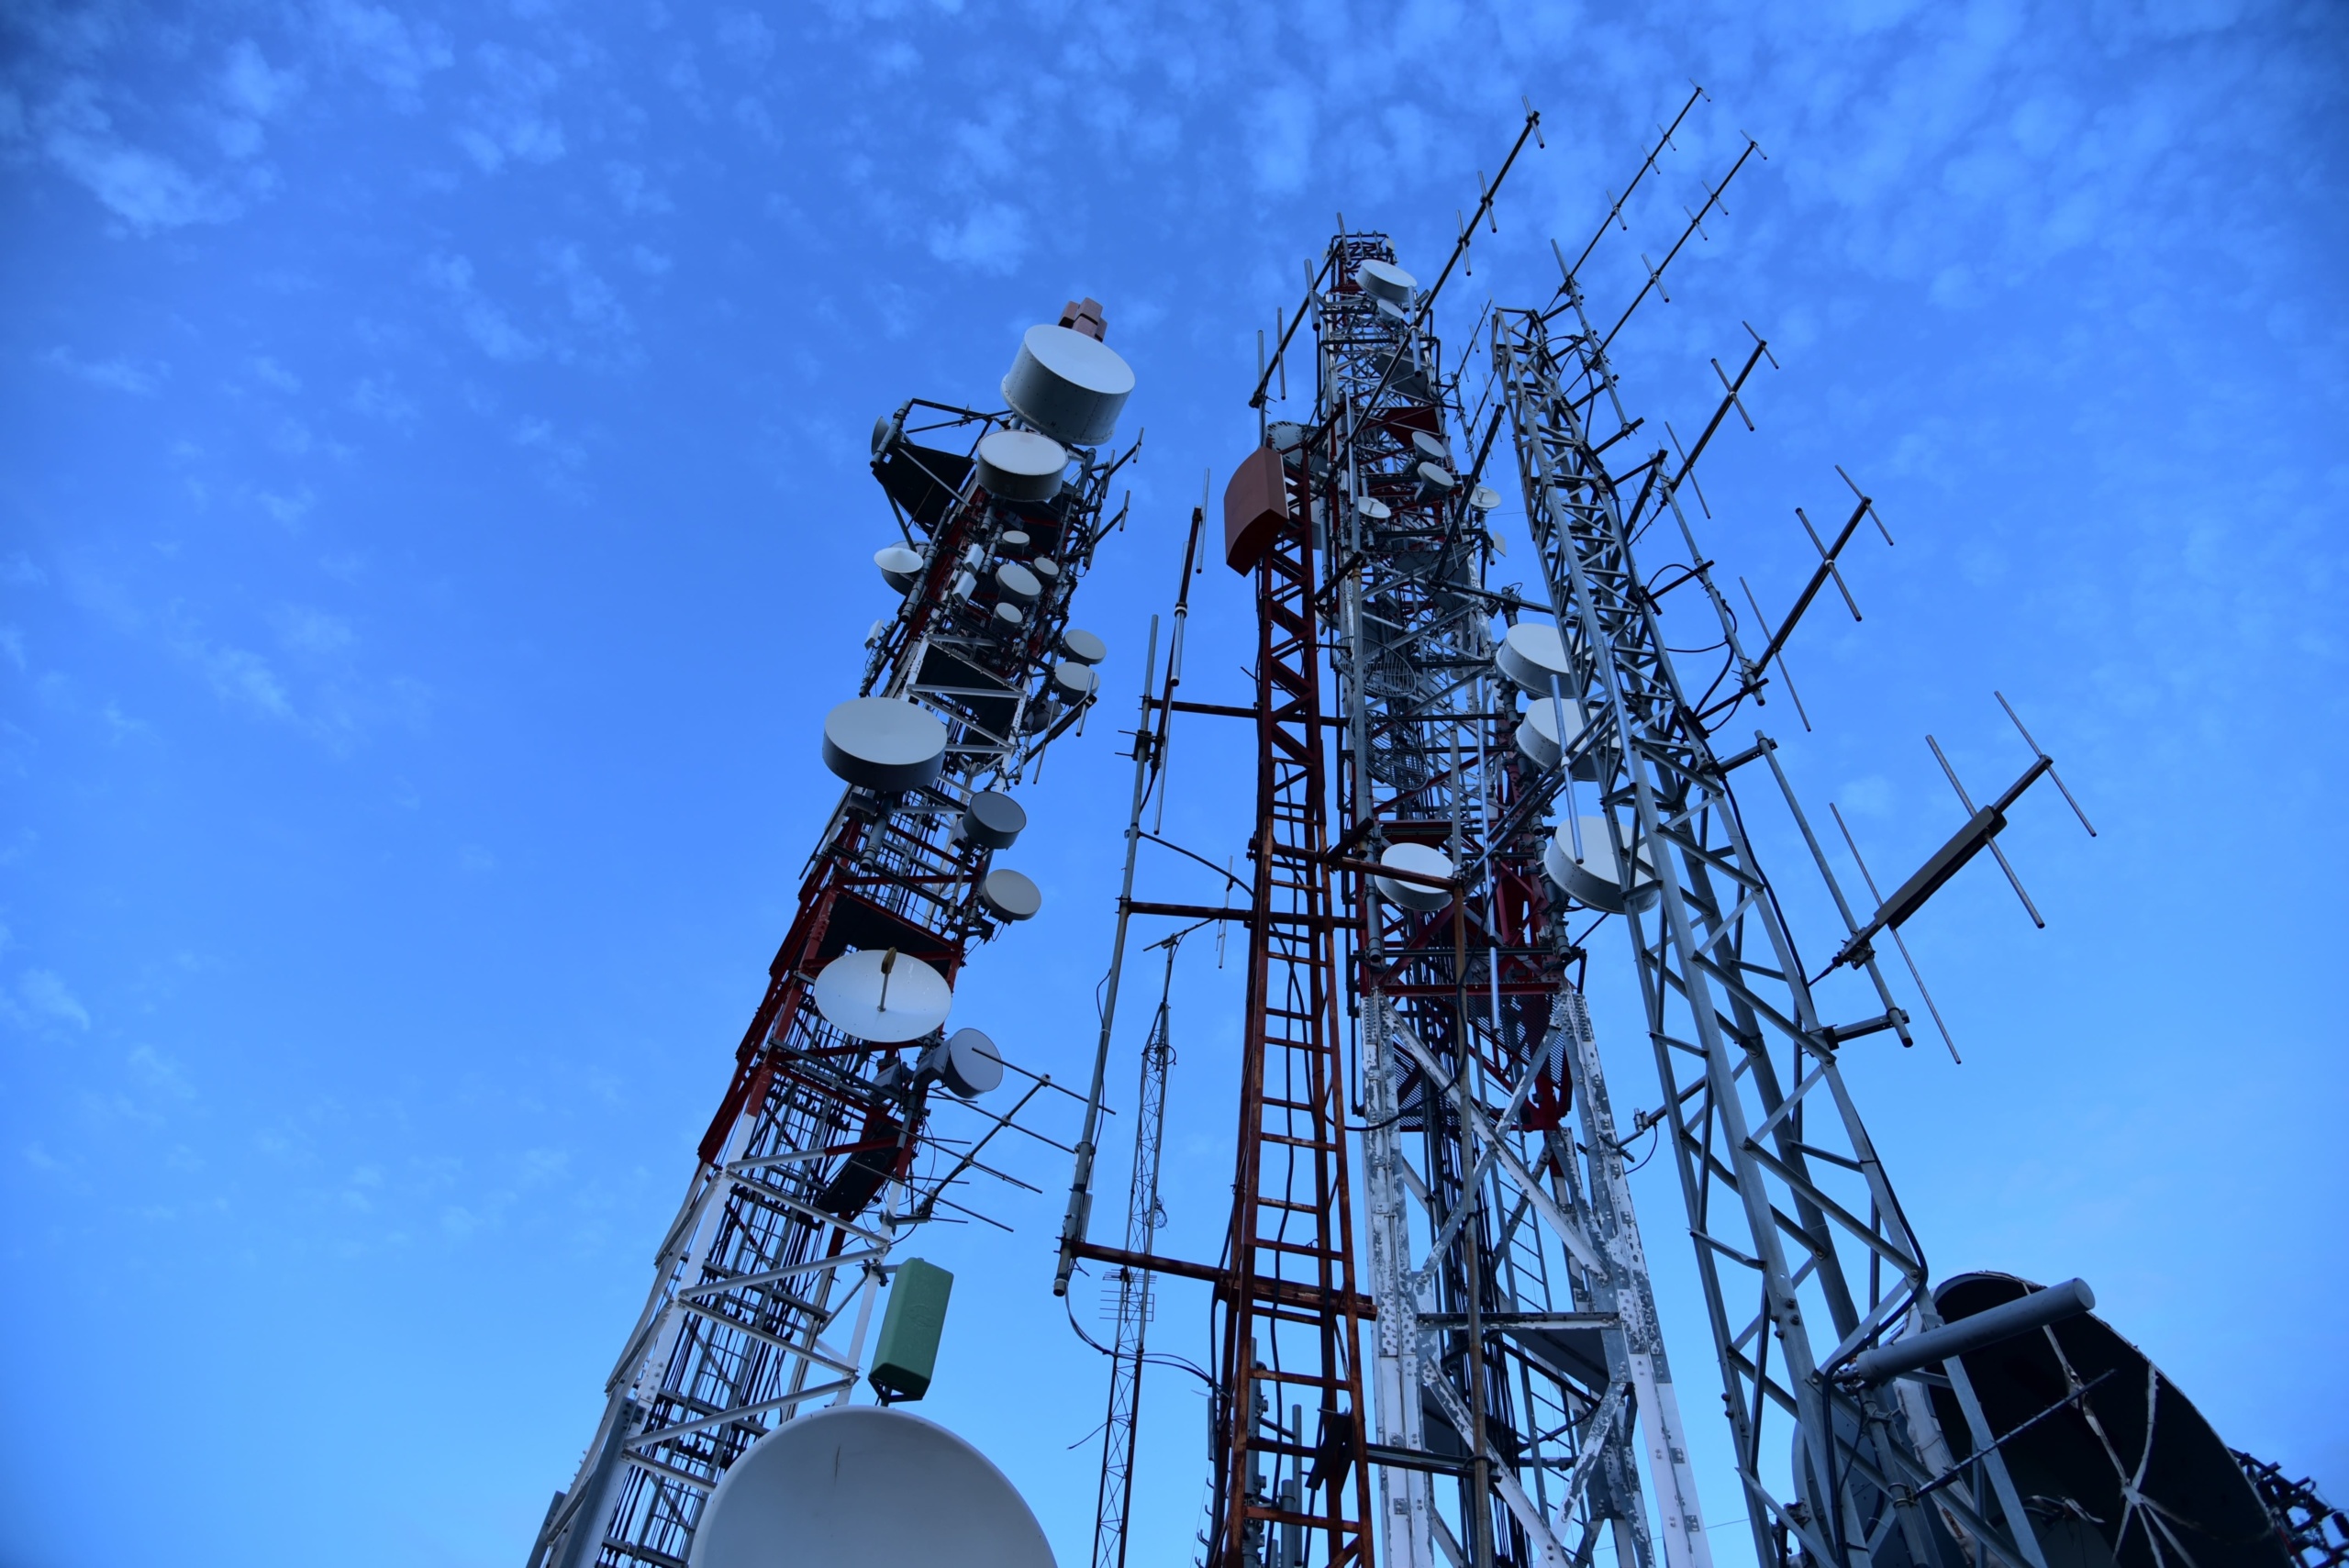 Following 4G: Next Steps for the Telco Sector